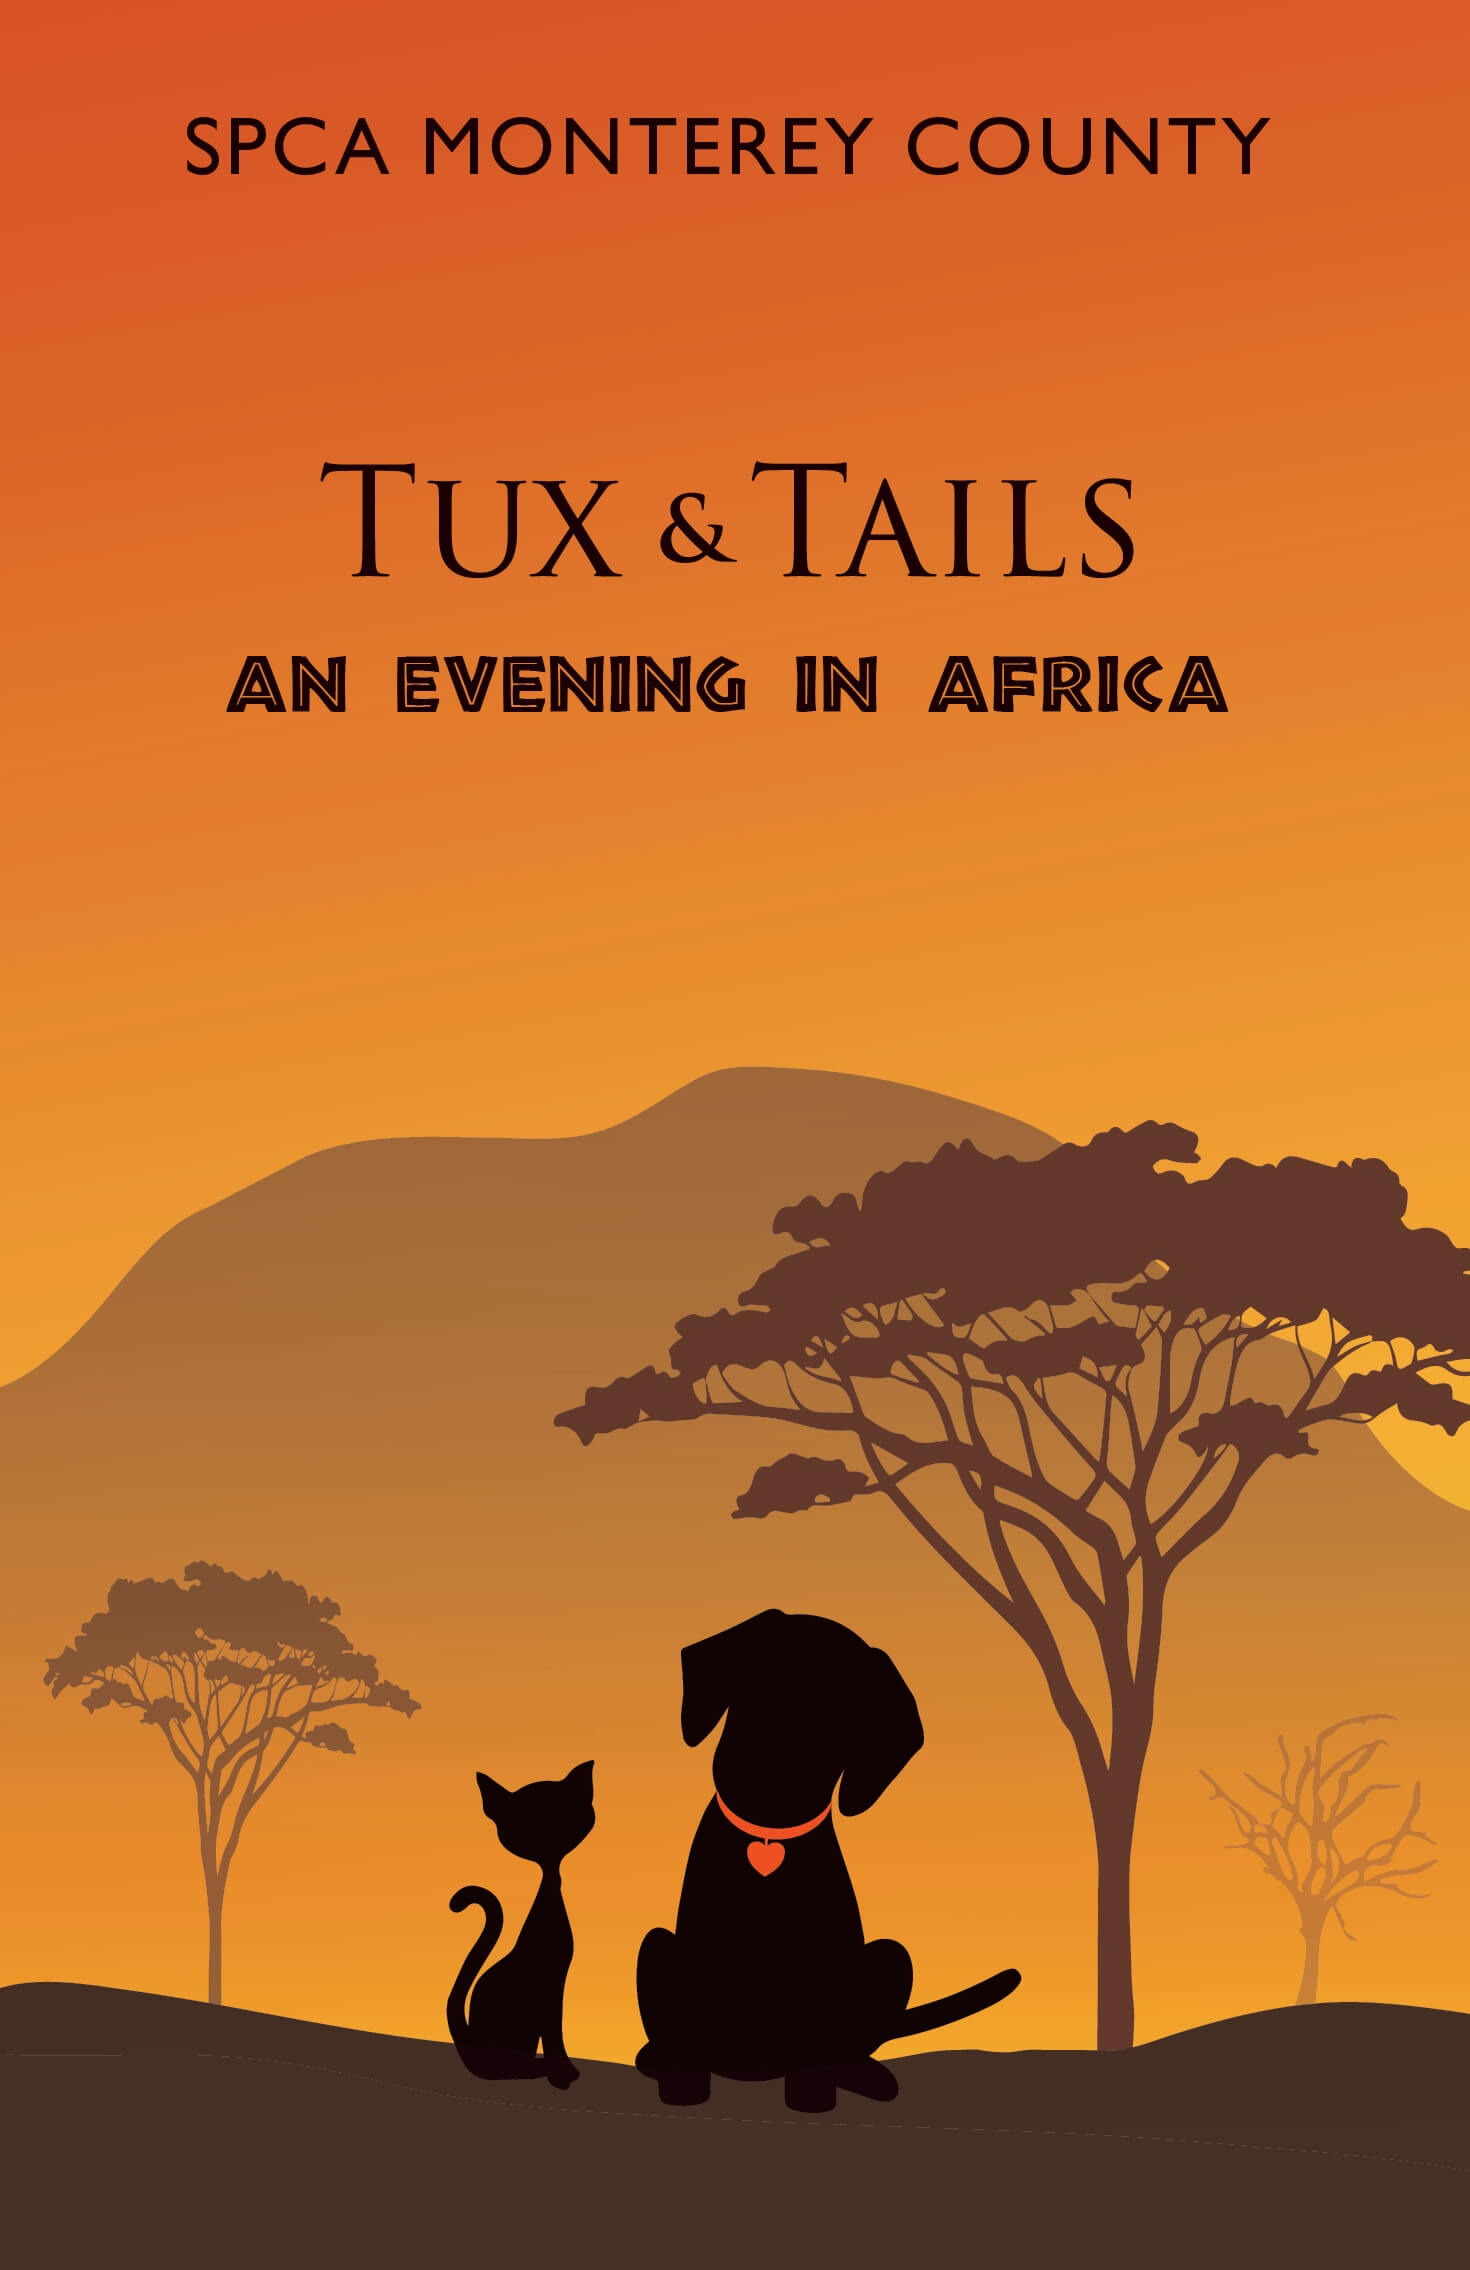 Charity event invitation with an African theme